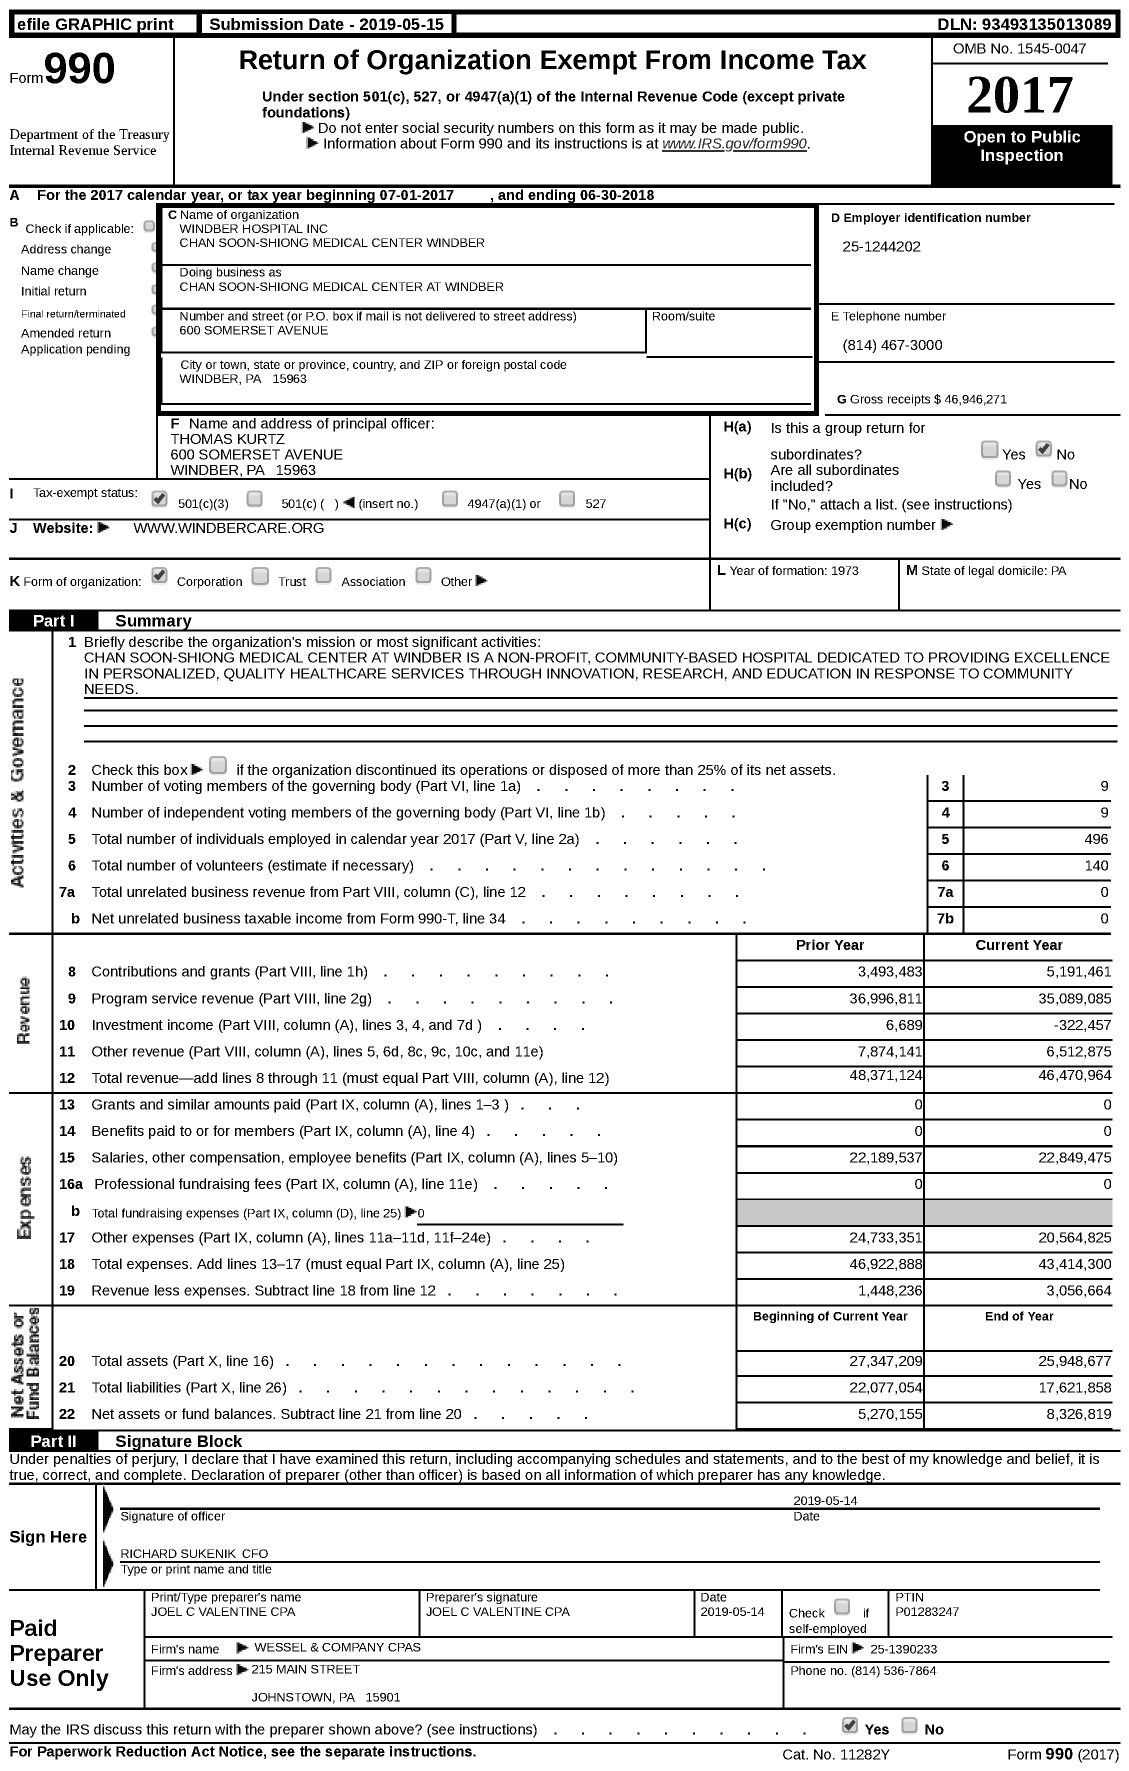 Image of first page of 2017 Form 990 for Chan Soon-Shiong Medical Center at Windber (CSSMCW)